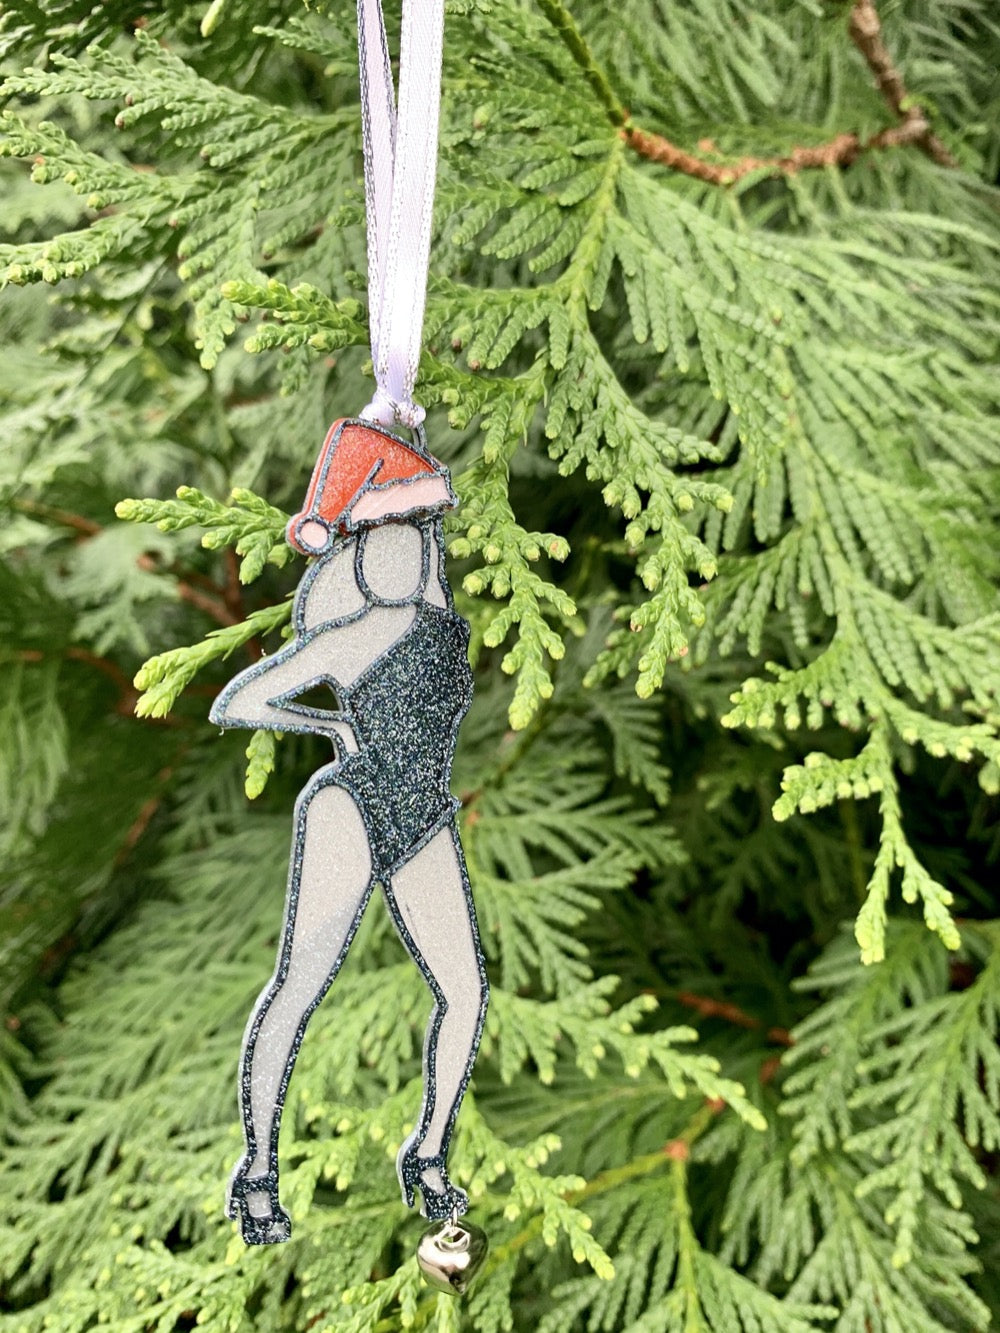 Hanging from a evergreen tree is a 3D Printed R+D ornament that looks like Beyonce from her Single Ladies video: She is posing with her hand on her hip and one leg jutting out to the side. She is wearing a red and white santa hat and a black lone shoulder leotard. She is wearing black strappy heels and a small jingle bell hangs from one of her feet. The entire ornament is covered in a shimmery glitter that will catch all the lights of your holiday celebration.